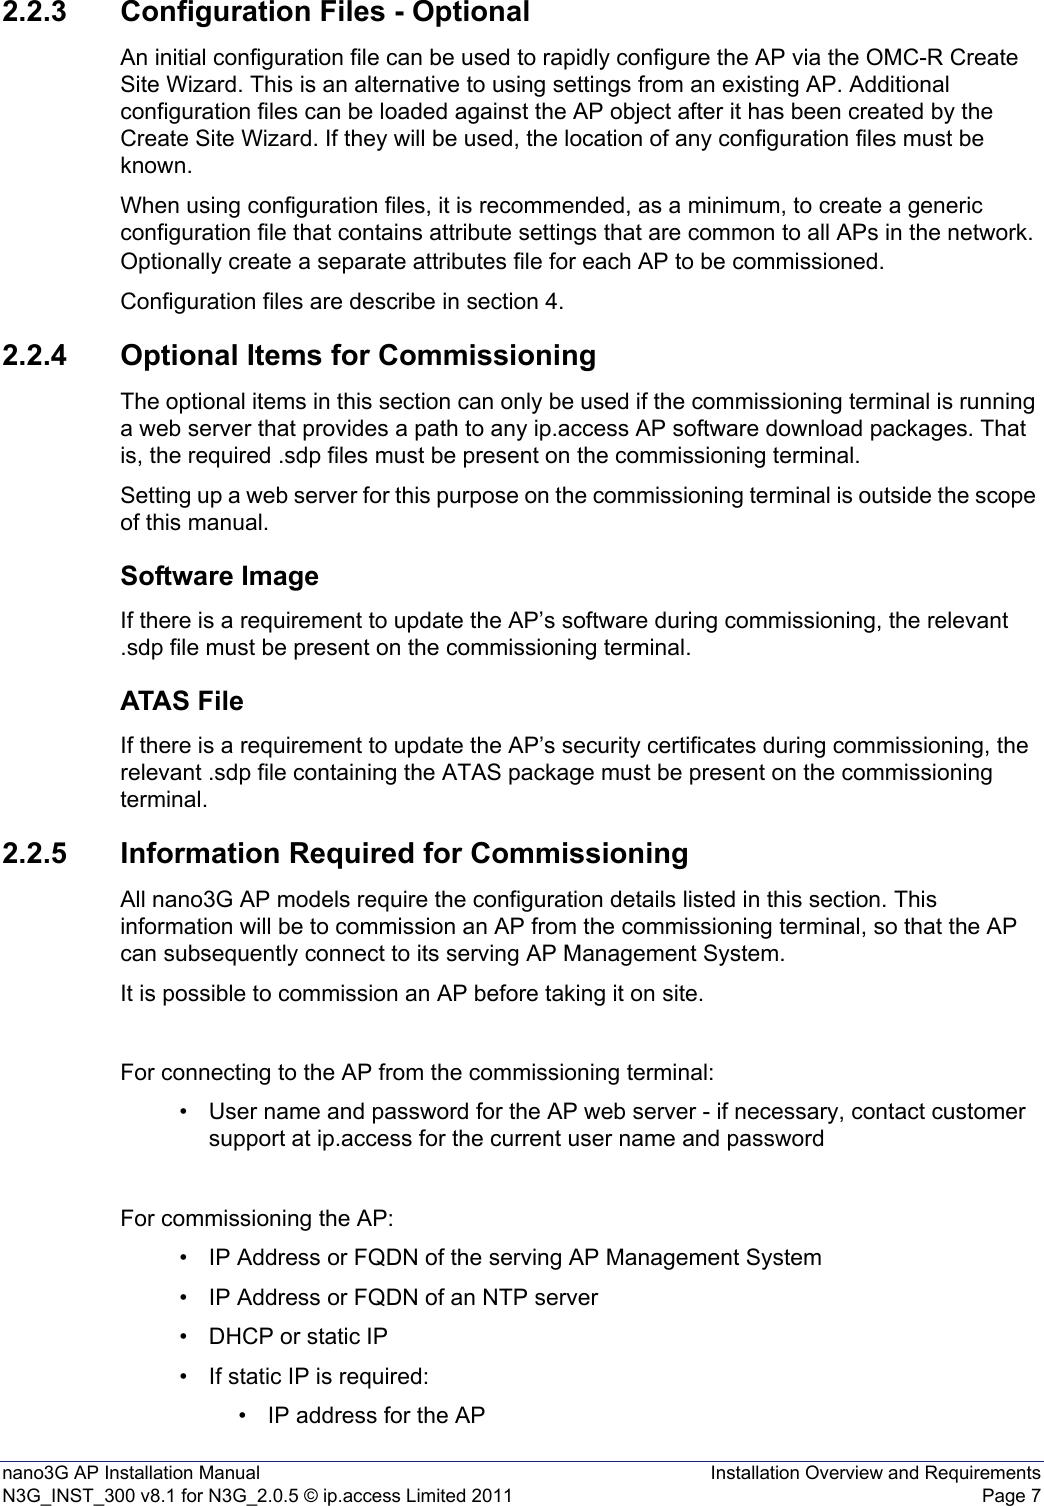 nano3G AP Installation Manual Installation Overview and RequirementsN3G_INST_300 v8.1 for N3G_2.0.5 © ip.access Limited 2011 Page 72.2.3 Configuration Files - OptionalAn initial configuration file can be used to rapidly configure the AP via the OMC-R Create Site Wizard. This is an alternative to using settings from an existing AP. Additional configuration files can be loaded against the AP object after it has been created by the Create Site Wizard. If they will be used, the location of any configuration files must be known. When using configuration files, it is recommended, as a minimum, to create a generic configuration file that contains attribute settings that are common to all APs in the network. Optionally create a separate attributes file for each AP to be commissioned.Configuration files are describe in section 4.2.2.4 Optional Items for CommissioningThe optional items in this section can only be used if the commissioning terminal is running a web server that provides a path to any ip.access AP software download packages. That is, the required .sdp files must be present on the commissioning terminal.Setting up a web server for this purpose on the commissioning terminal is outside the scope of this manual.Software ImageIf there is a requirement to update the AP’s software during commissioning, the relevant .sdp file must be present on the commissioning terminal. ATAS FileIf there is a requirement to update the AP’s security certificates during commissioning, the relevant .sdp file containing the ATAS package must be present on the commissioning terminal. 2.2.5 Information Required for CommissioningAll nano3G AP models require the configuration details listed in this section. This information will be to commission an AP from the commissioning terminal, so that the AP can subsequently connect to its serving AP Management System.It is possible to commission an AP before taking it on site. For connecting to the AP from the commissioning terminal: • User name and password for the AP web server - if necessary, contact customer support at ip.access for the current user name and passwordFor commissioning the AP:• IP Address or FQDN of the serving AP Management System• IP Address or FQDN of an NTP server• DHCP or static IP• If static IP is required:• IP address for the AP